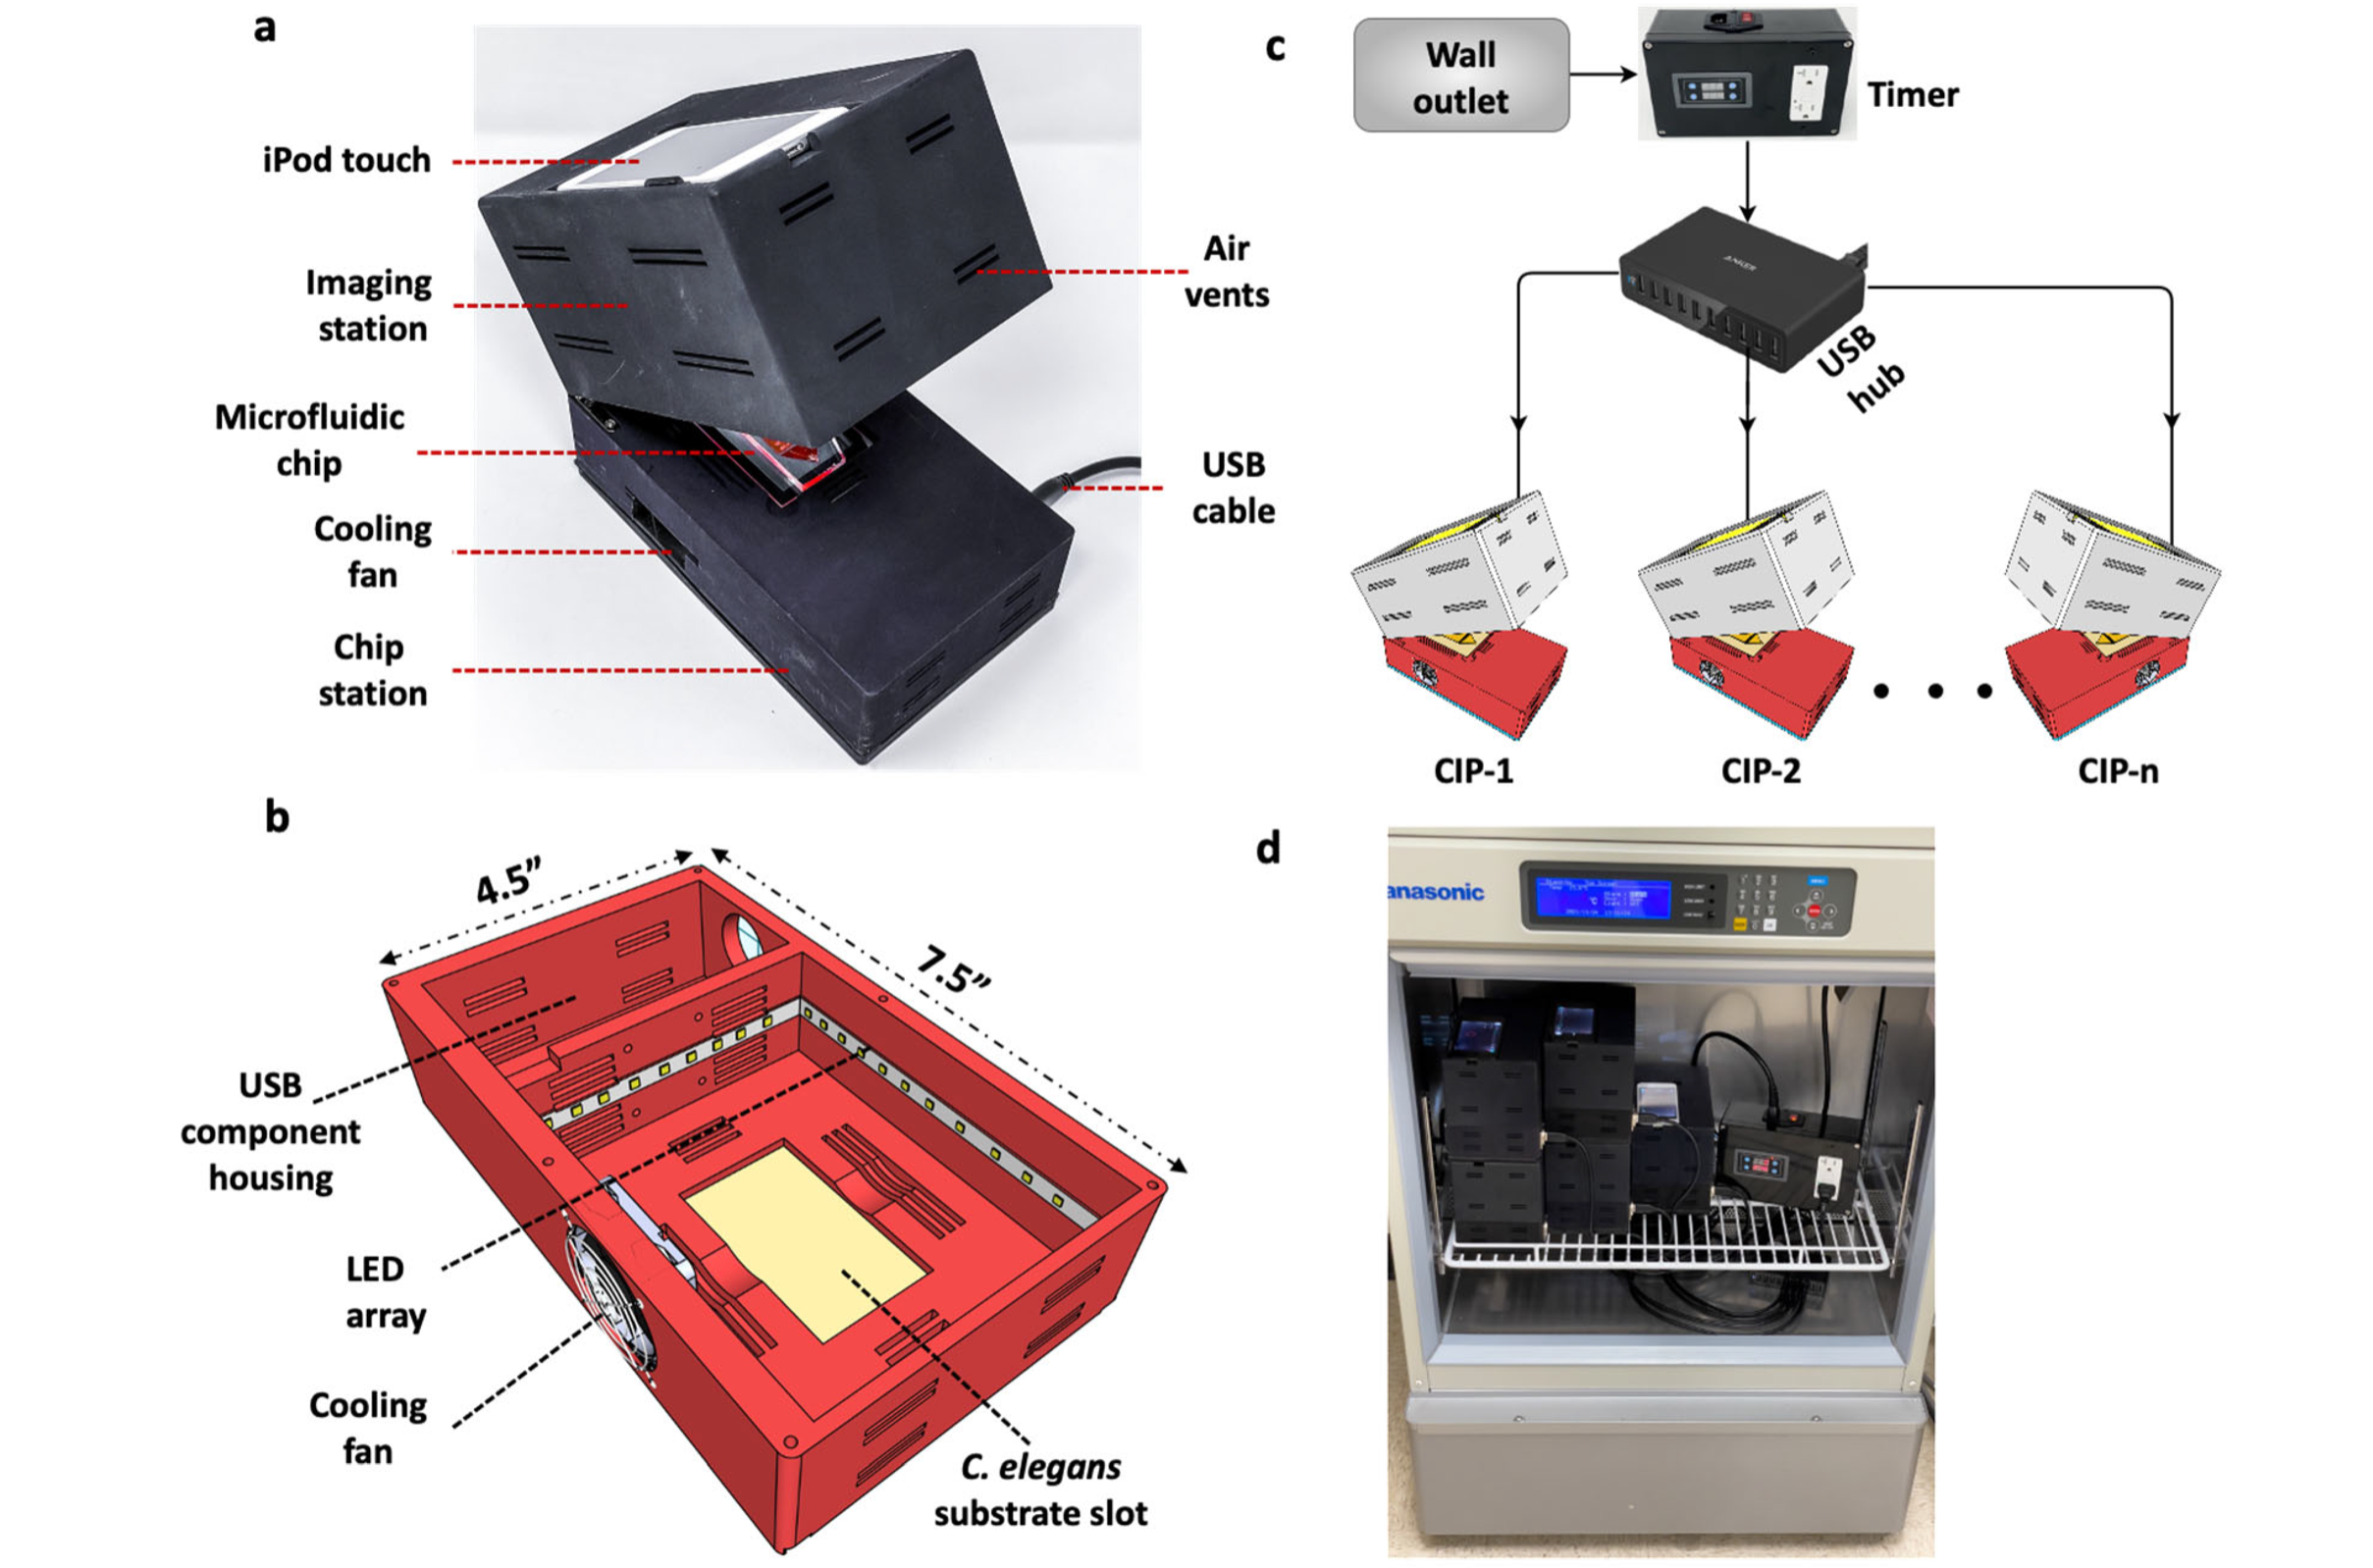 Tricorder Tech: 3D Printed Compact Imaging Platform Validated for Space Research with C. elegans